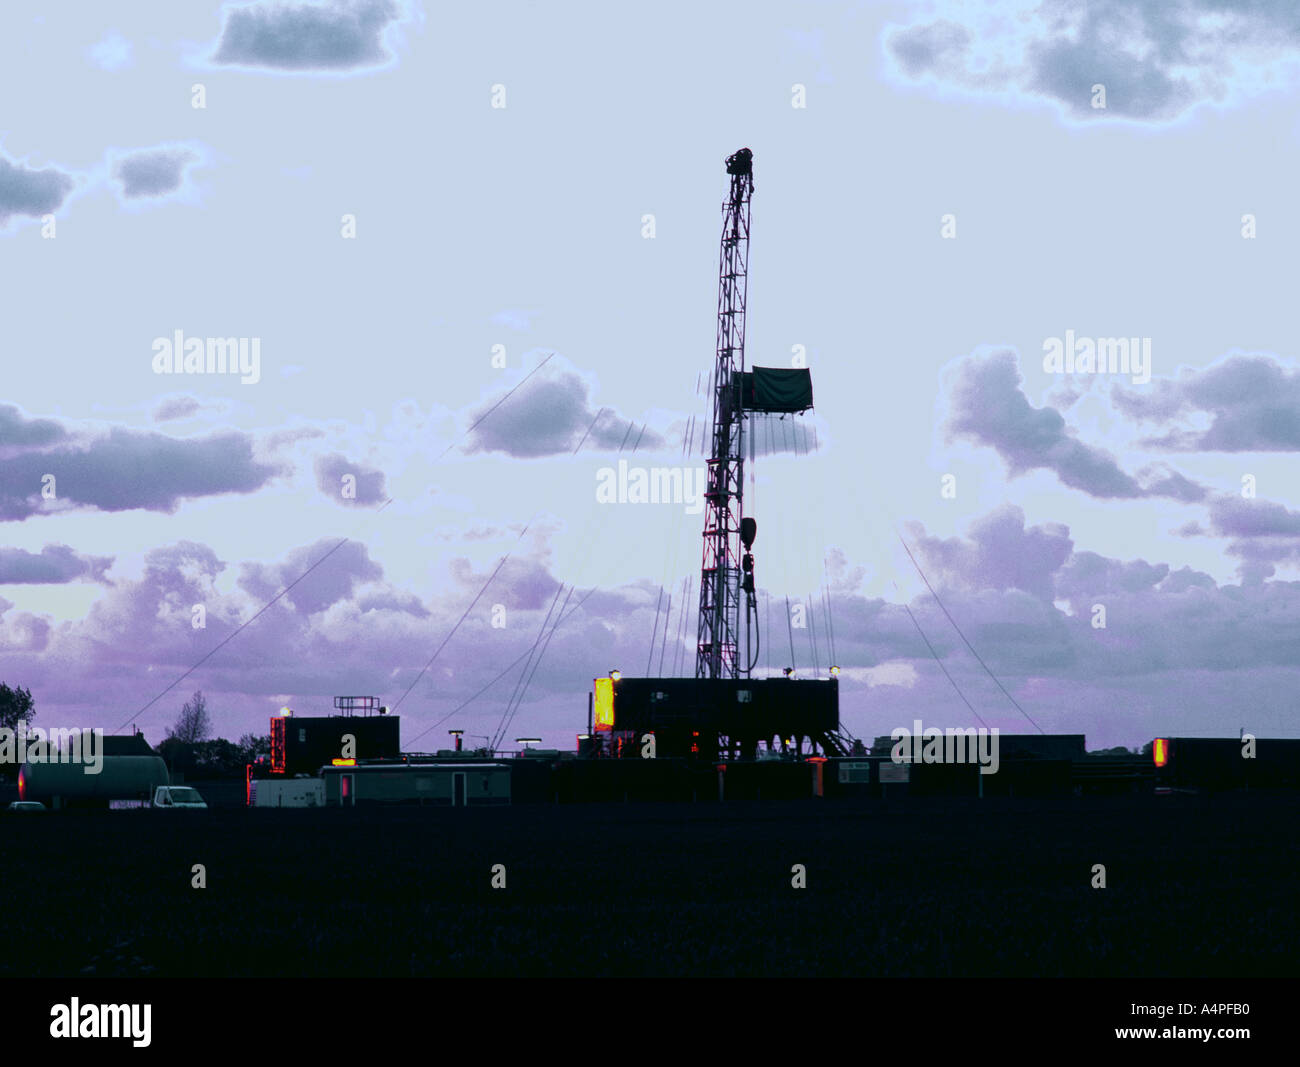 Oil exploration drilling rig in the marshland of Lincolnshire England Stock Photo